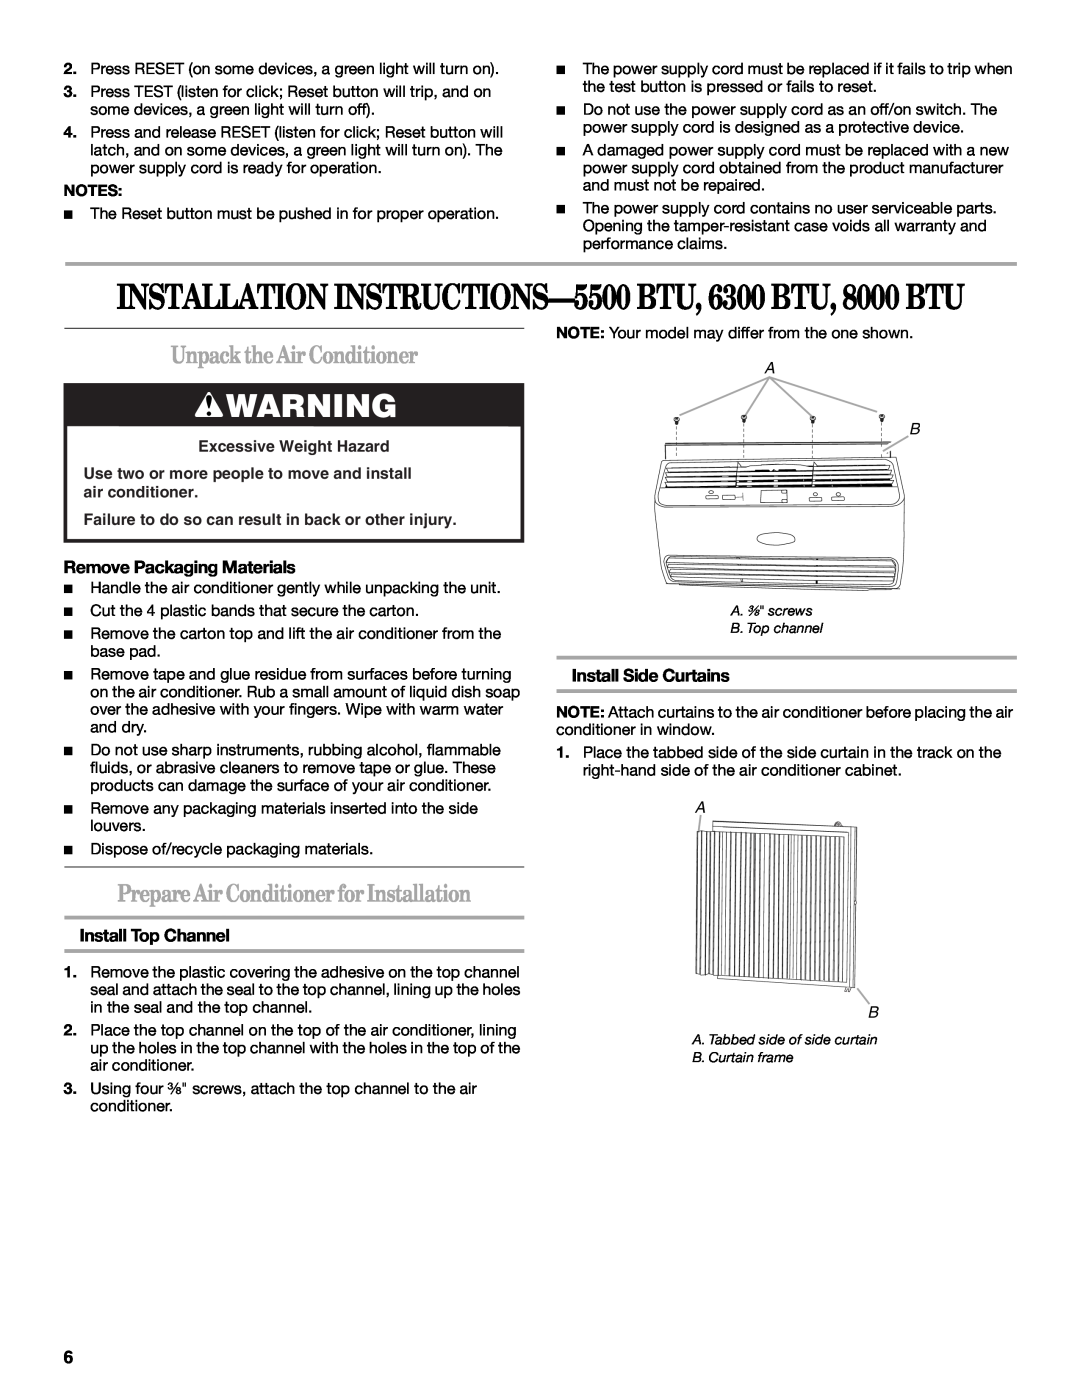 Whirlpool 66161279 manual Unpack the Air Conditioner, Prepare Air Conditioner for Installation, Remove Packaging Materials 